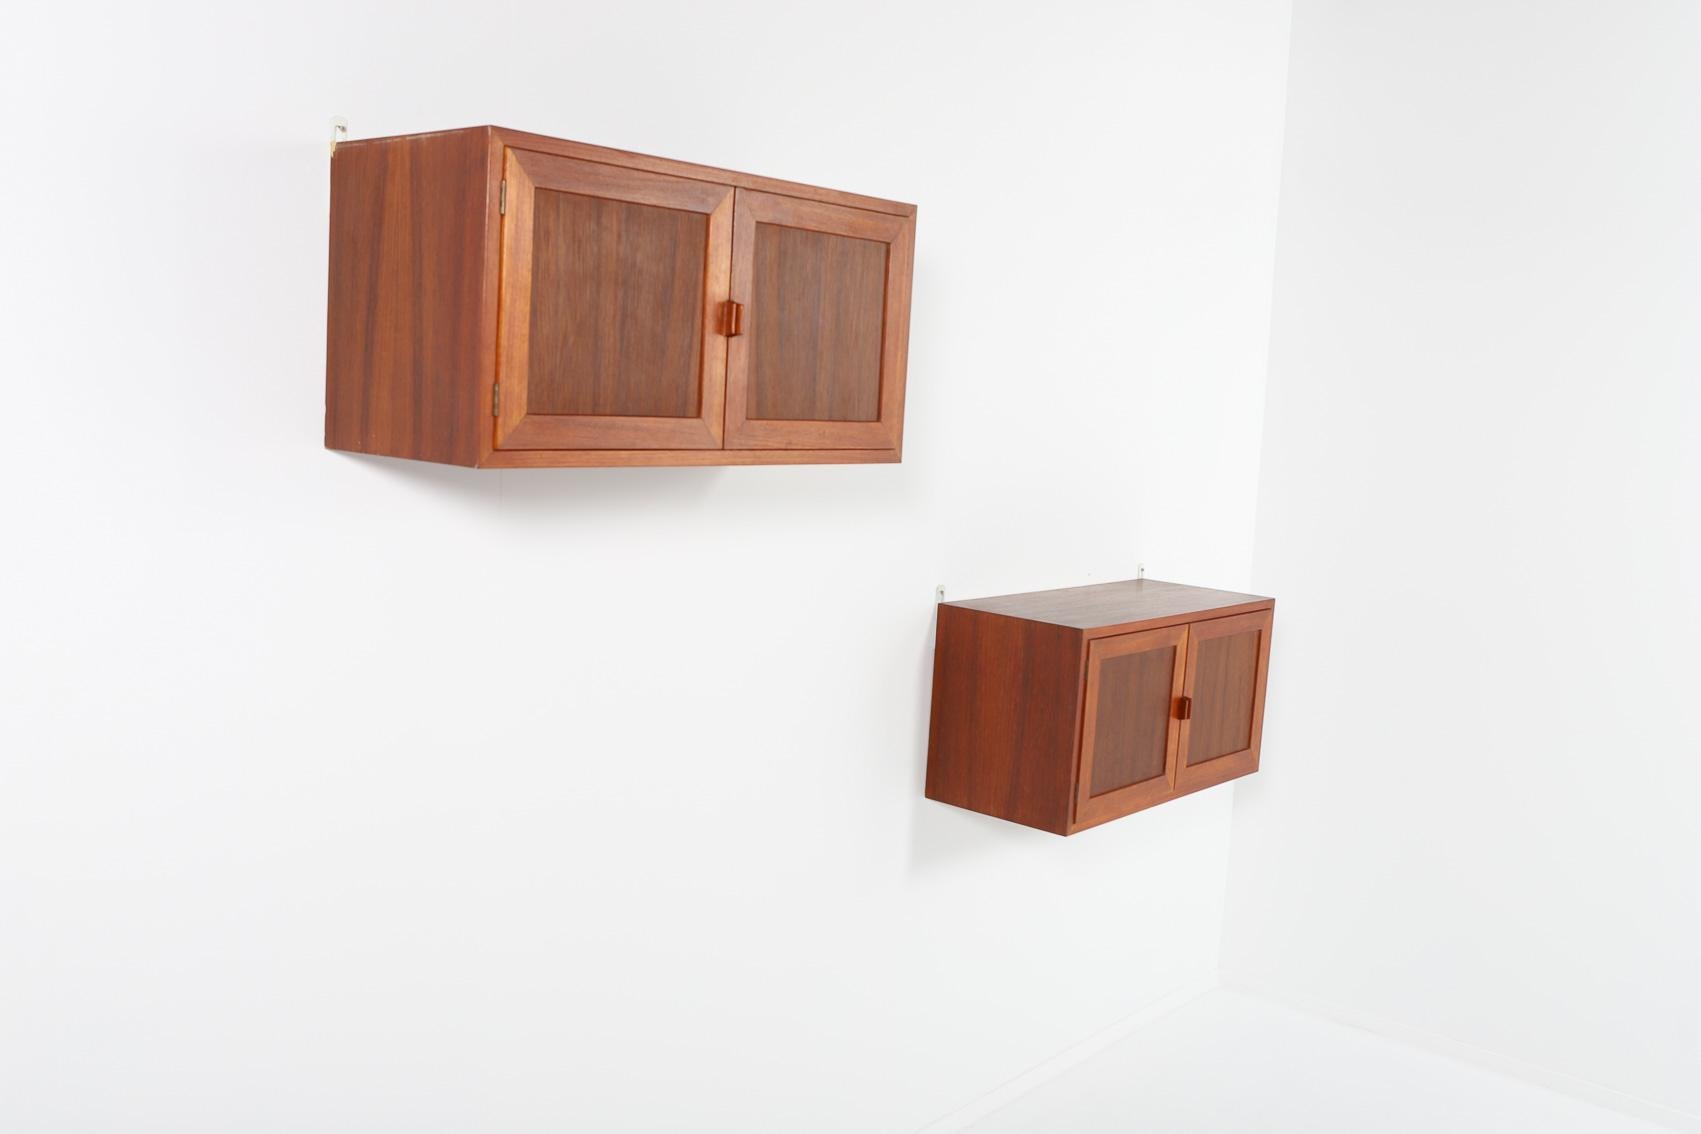 Beautiful pair varnished teak wall cabinets designed and produced in Denmark by Johannes Andersen.

Condition
Good, age related usage wear and marks

Dimensions
height: 40 cm
width: 80 cm
depth: 34 cm